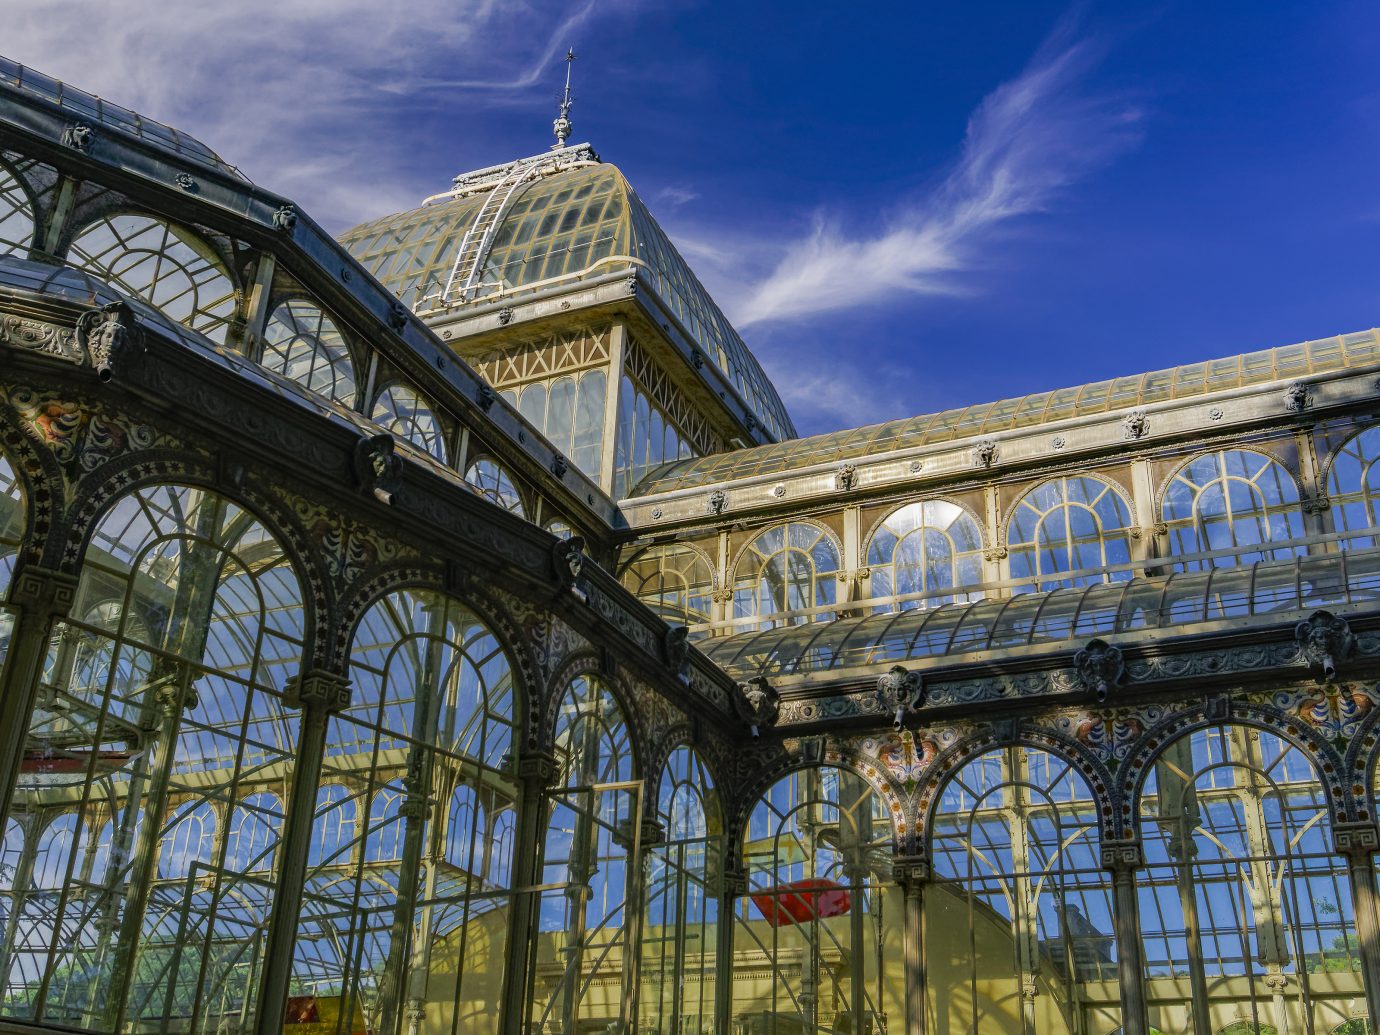 Day view of 1887 glass and metal structure of crystal palace at Park Retiro.